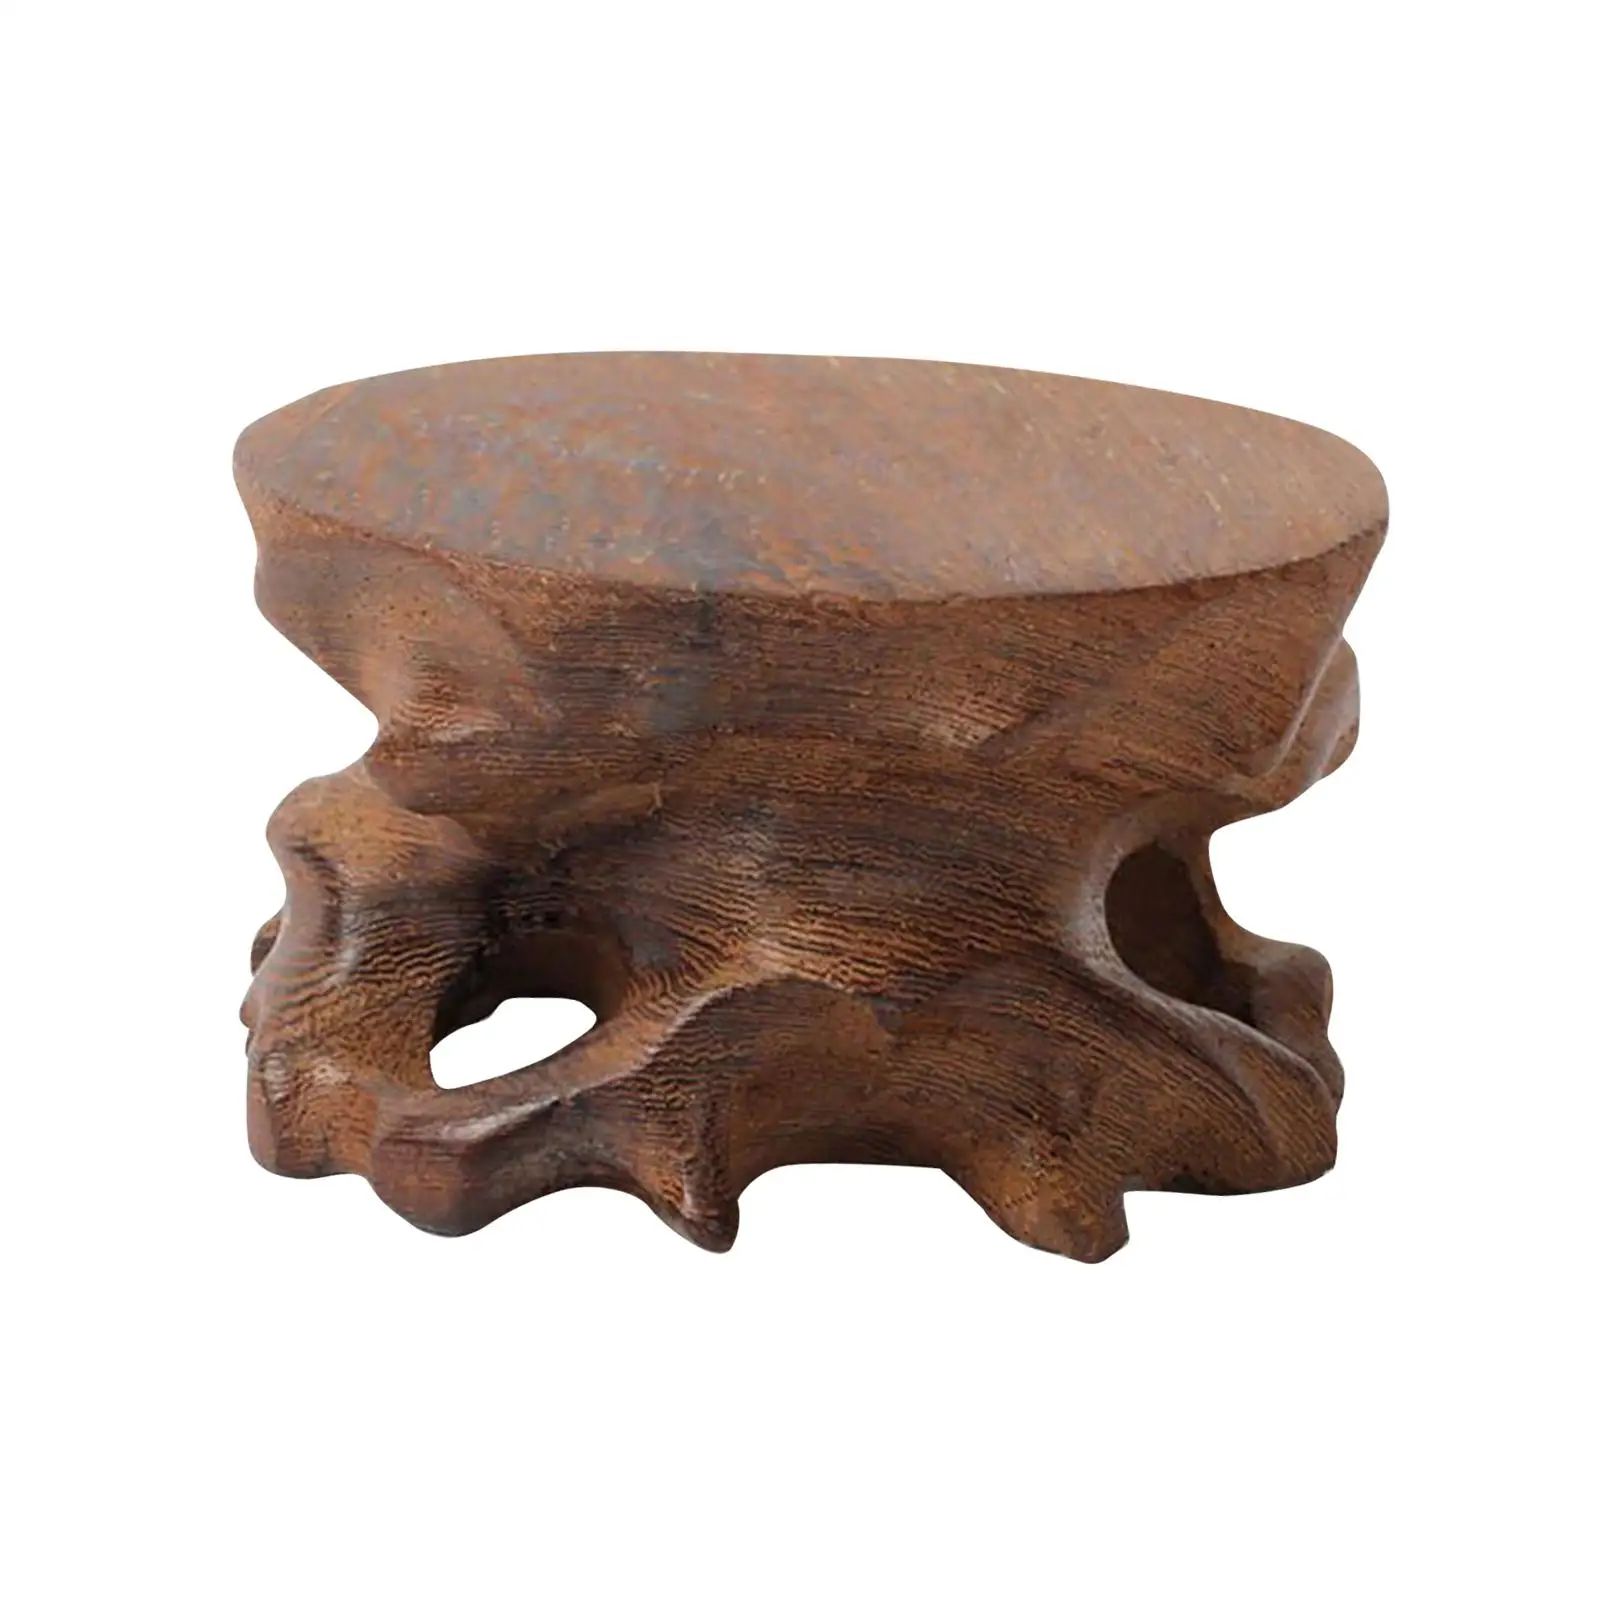 Wooden Stone Display Base Teapot Base Small Decorative Base Vase Base Display Stand Wood Decorative Base for Living Room Home